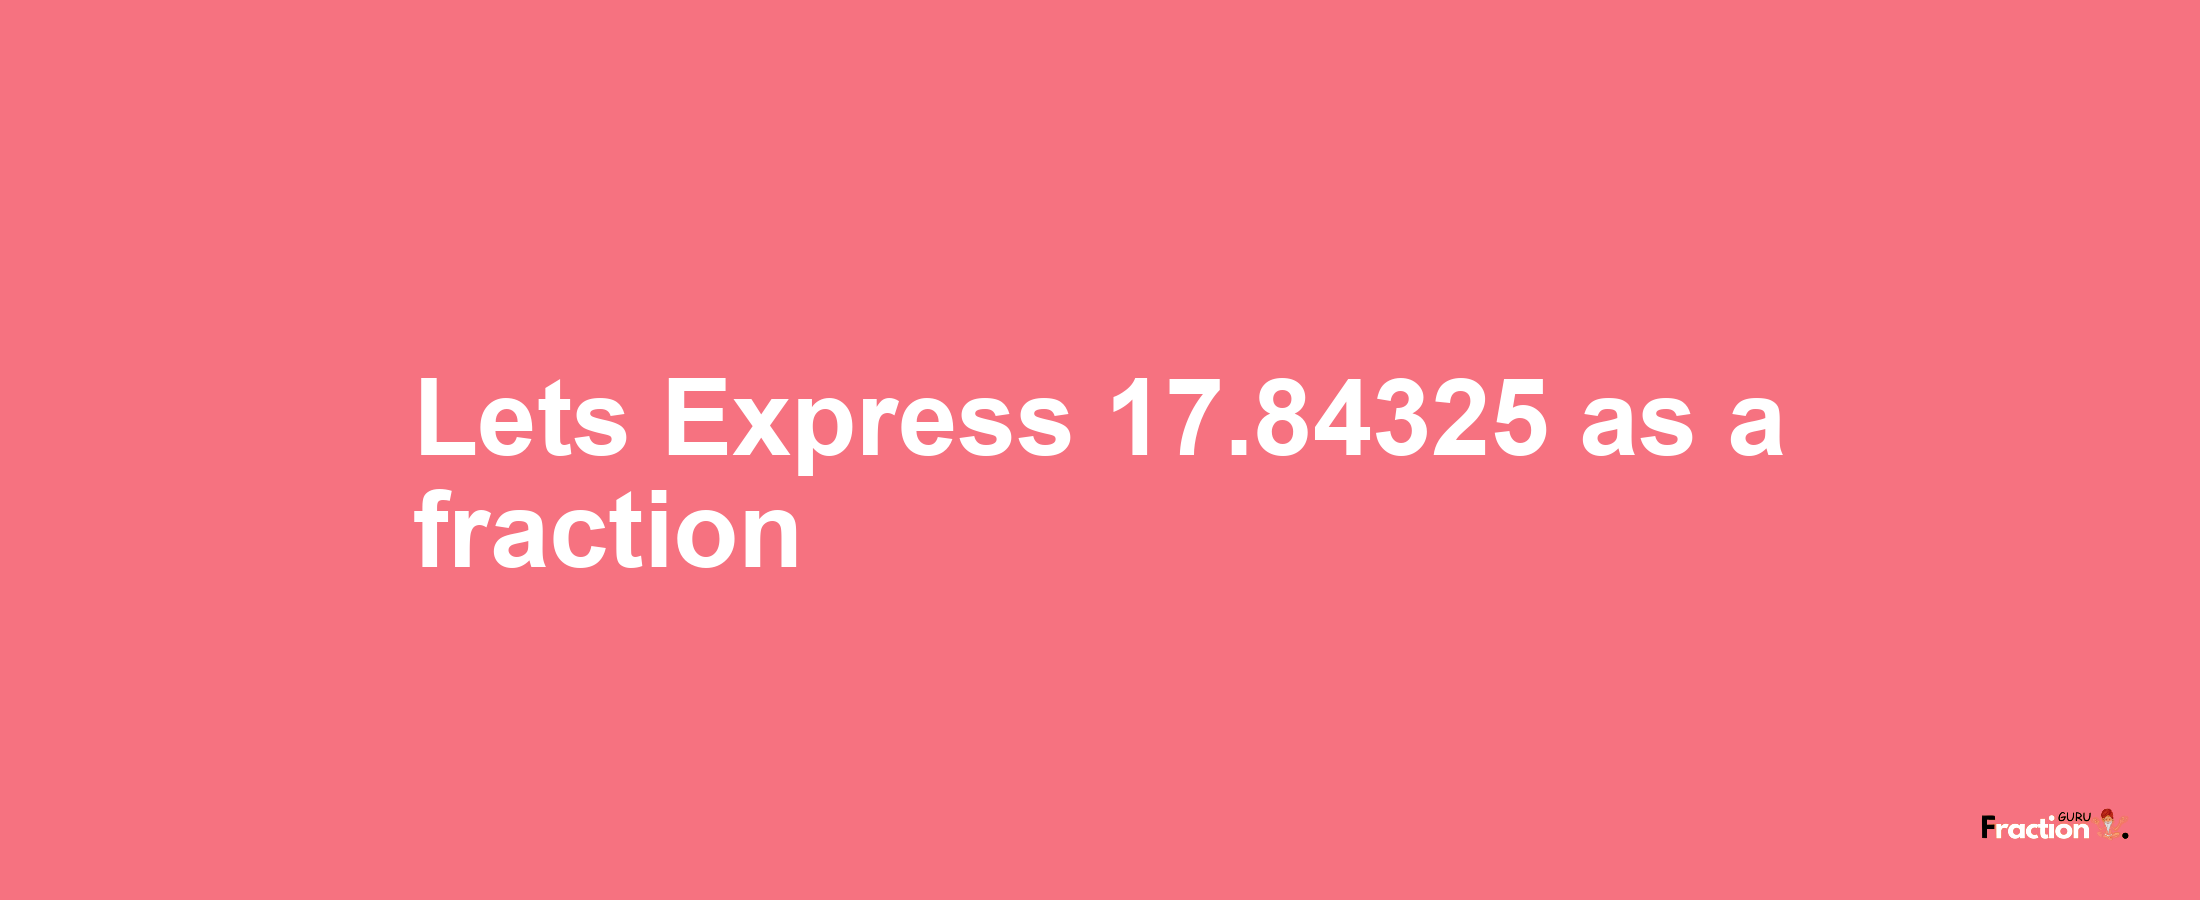 Lets Express 17.84325 as afraction